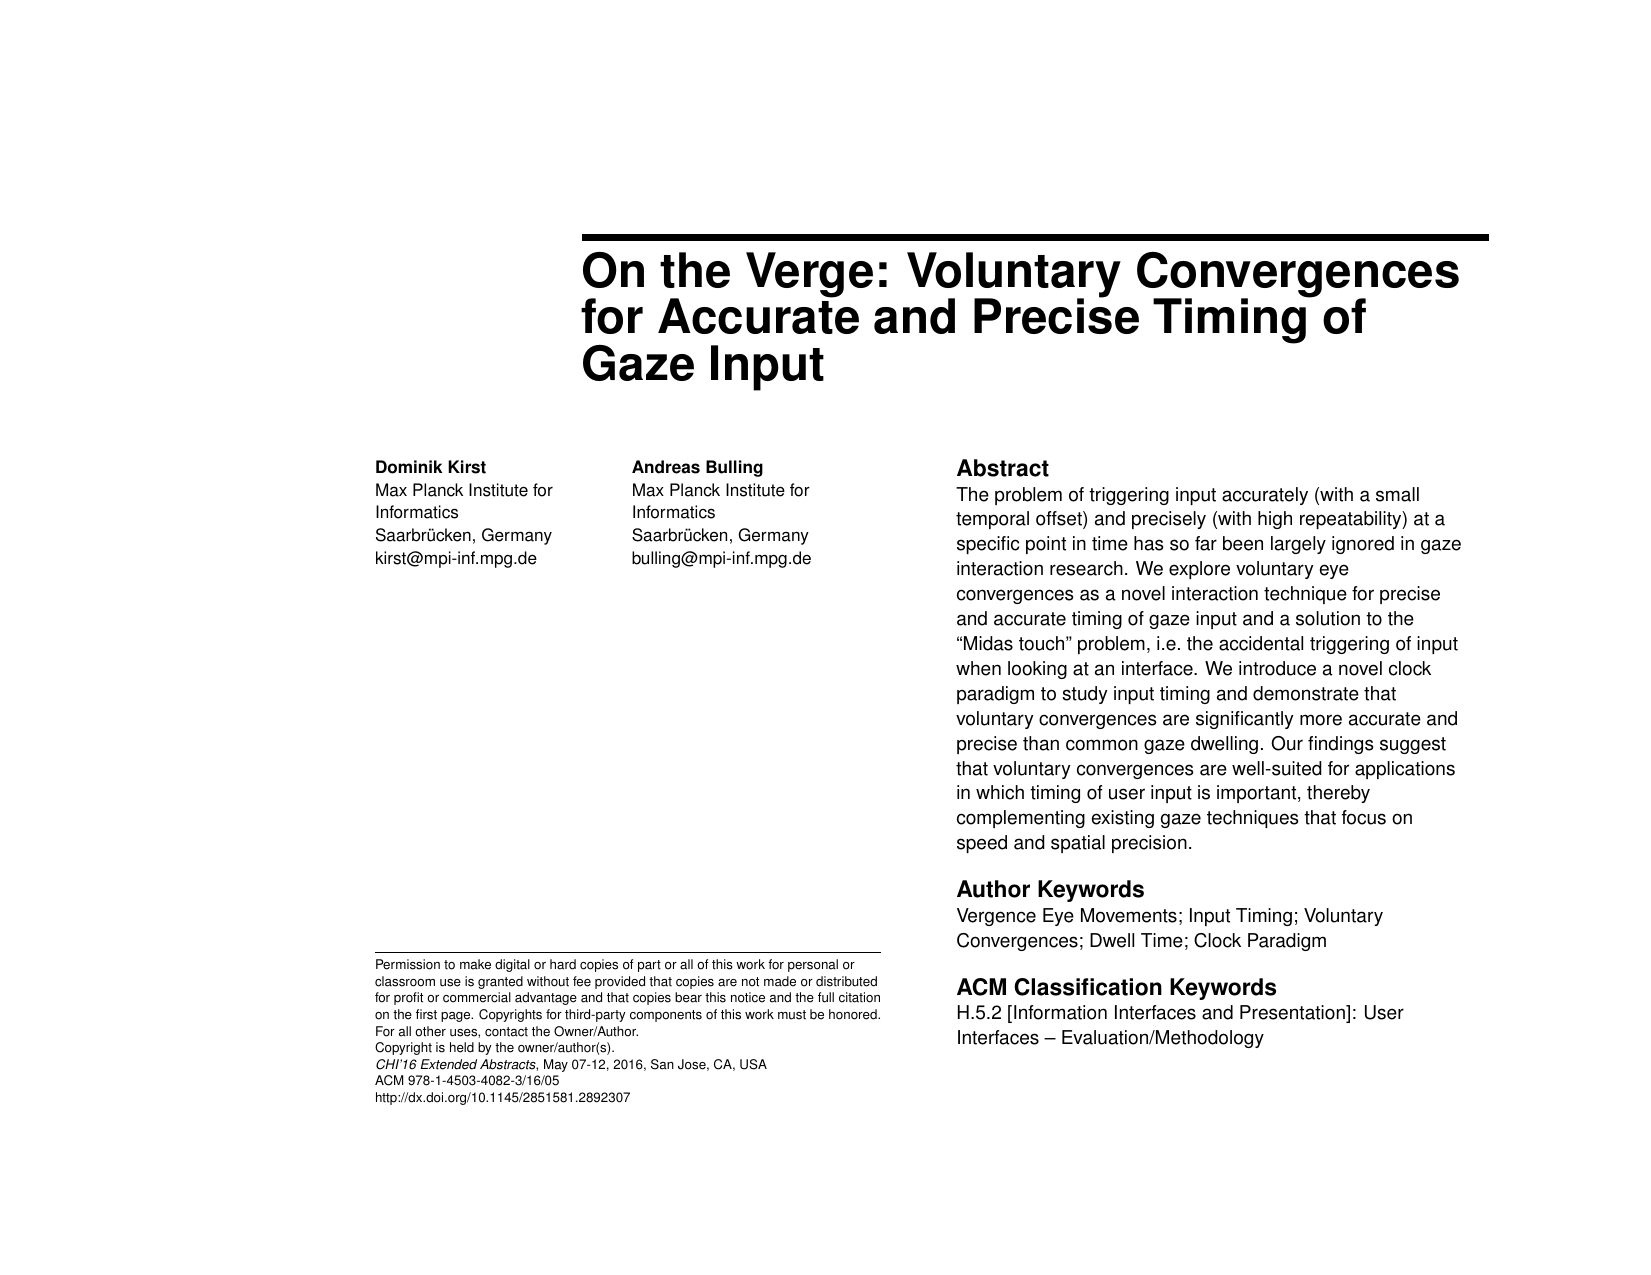 On the Verge: Voluntary Convergences for Accurate and Precise Timing of Gaze Input